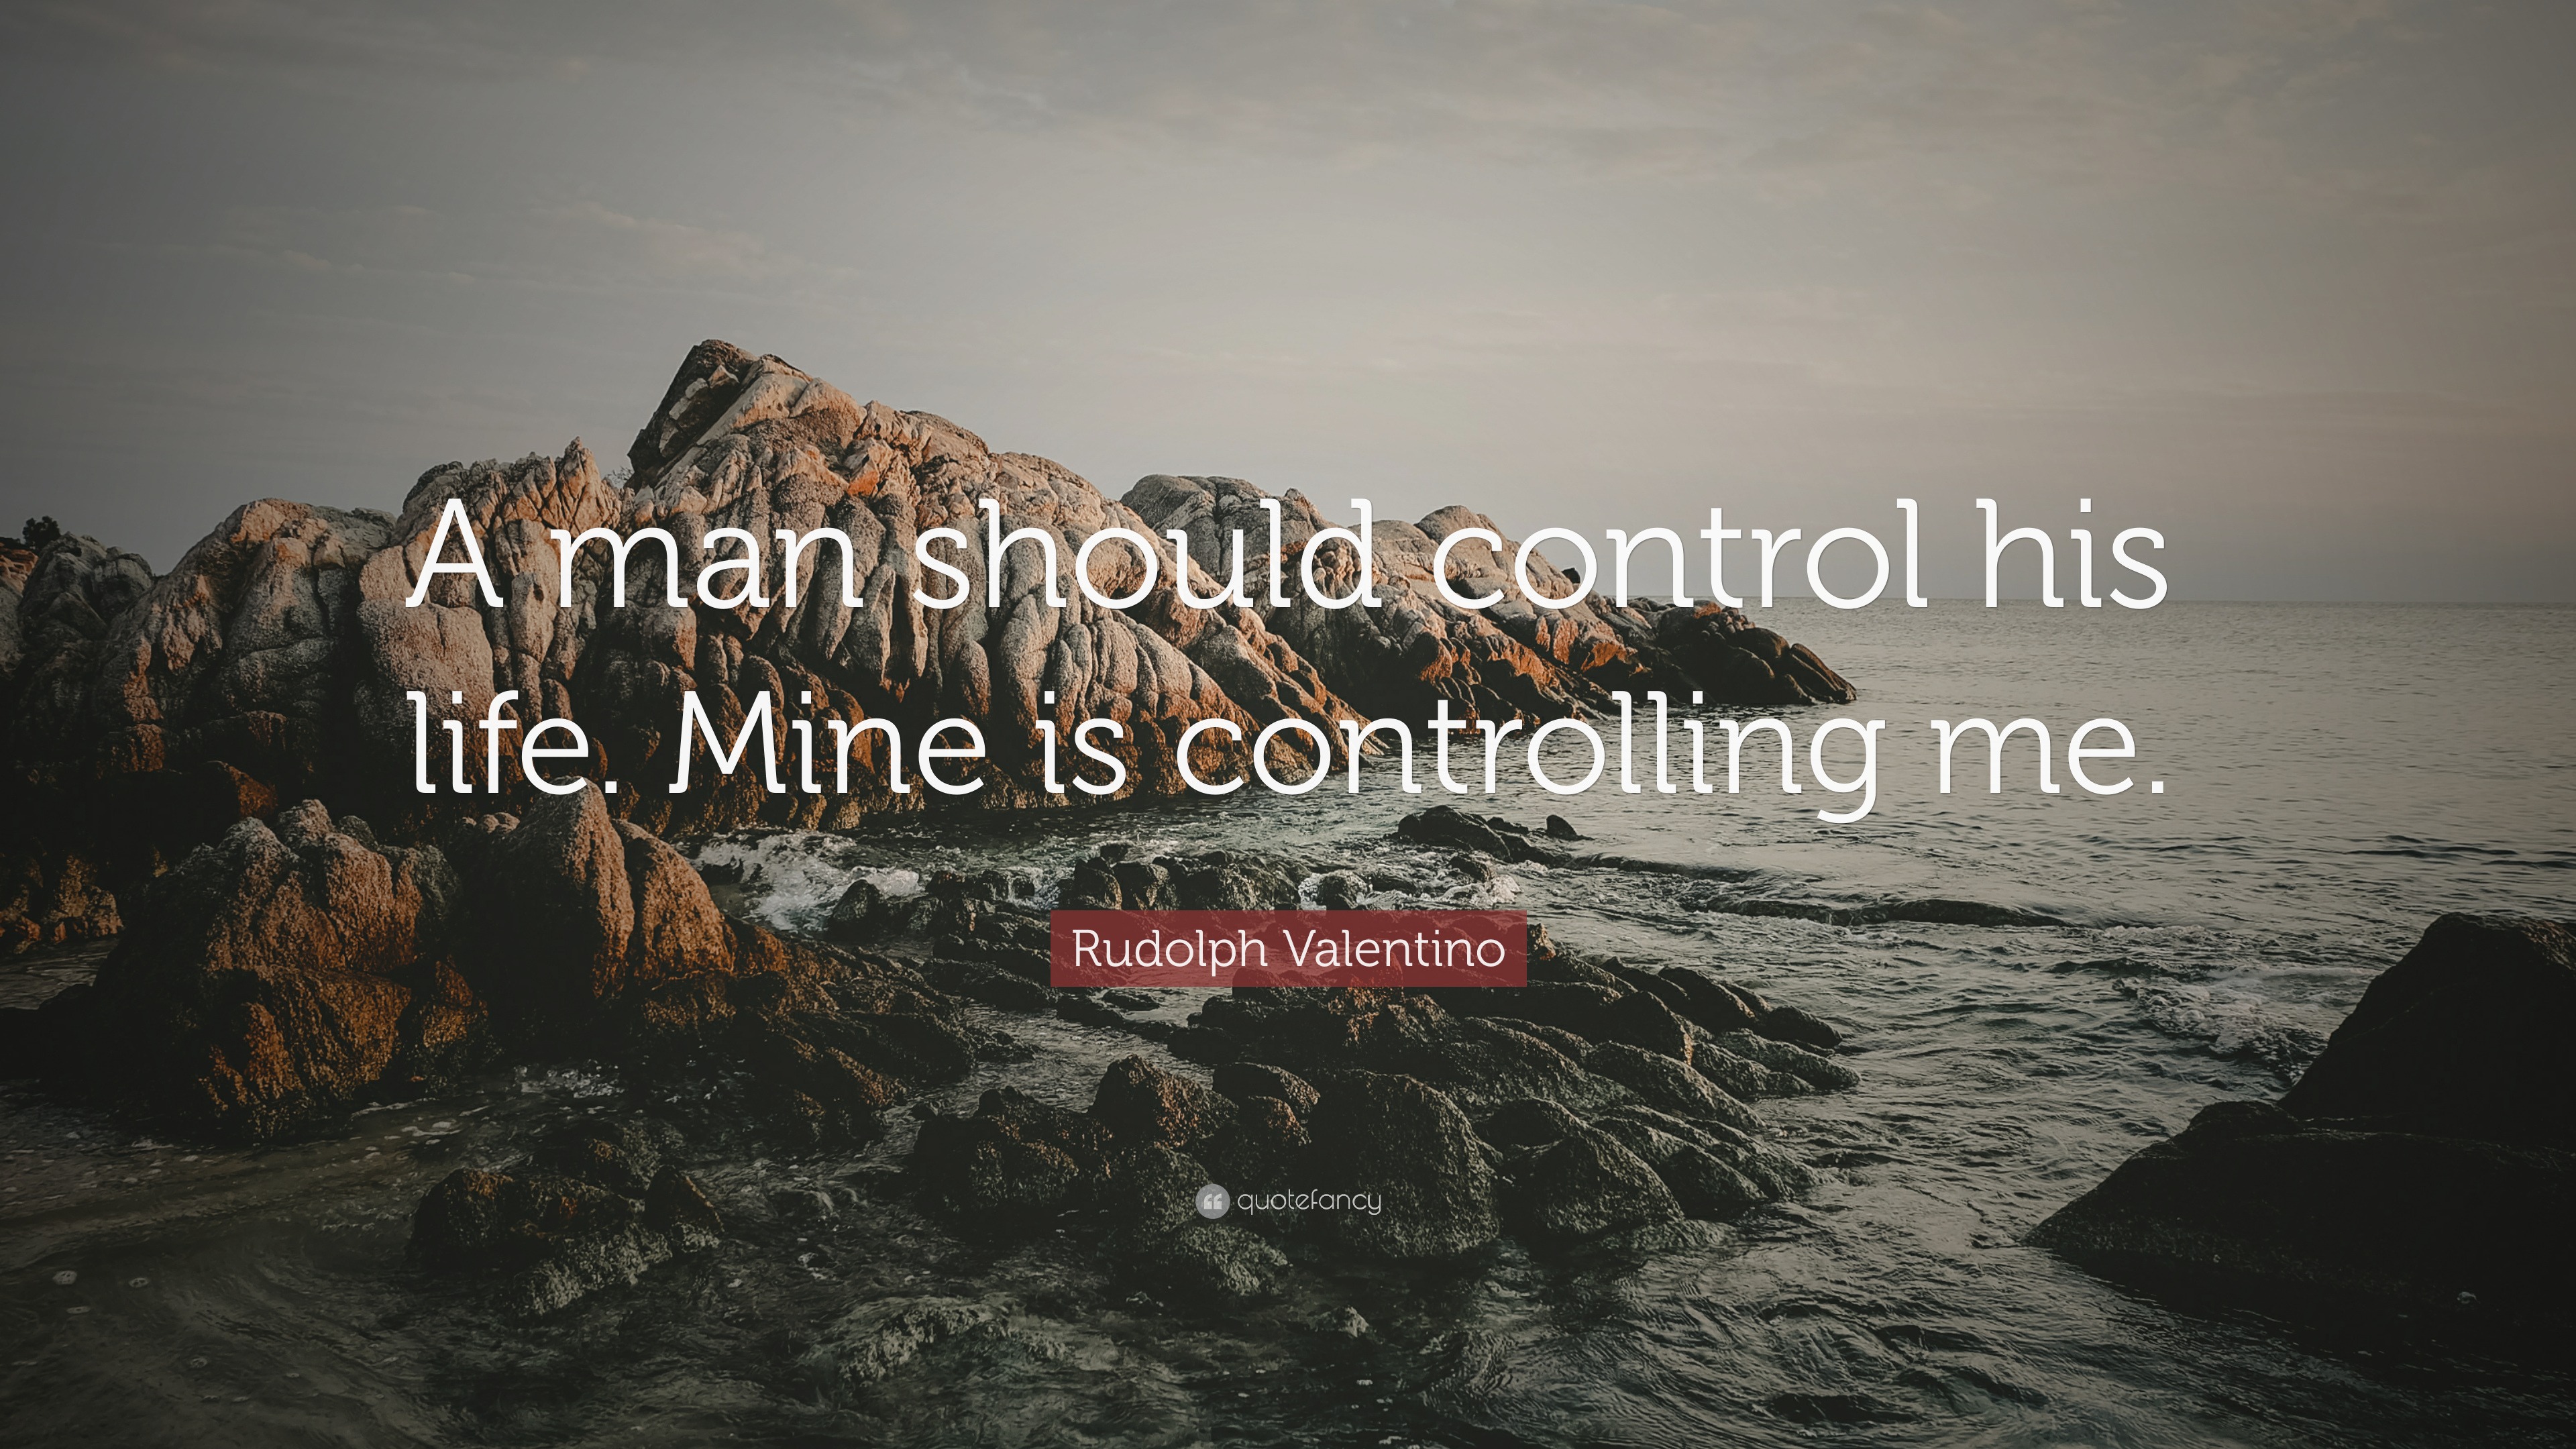 dobbelt uvidenhed Forstyrrelse Rudolph Valentino Quote: “A man should control his life. Mine is  controlling me.”